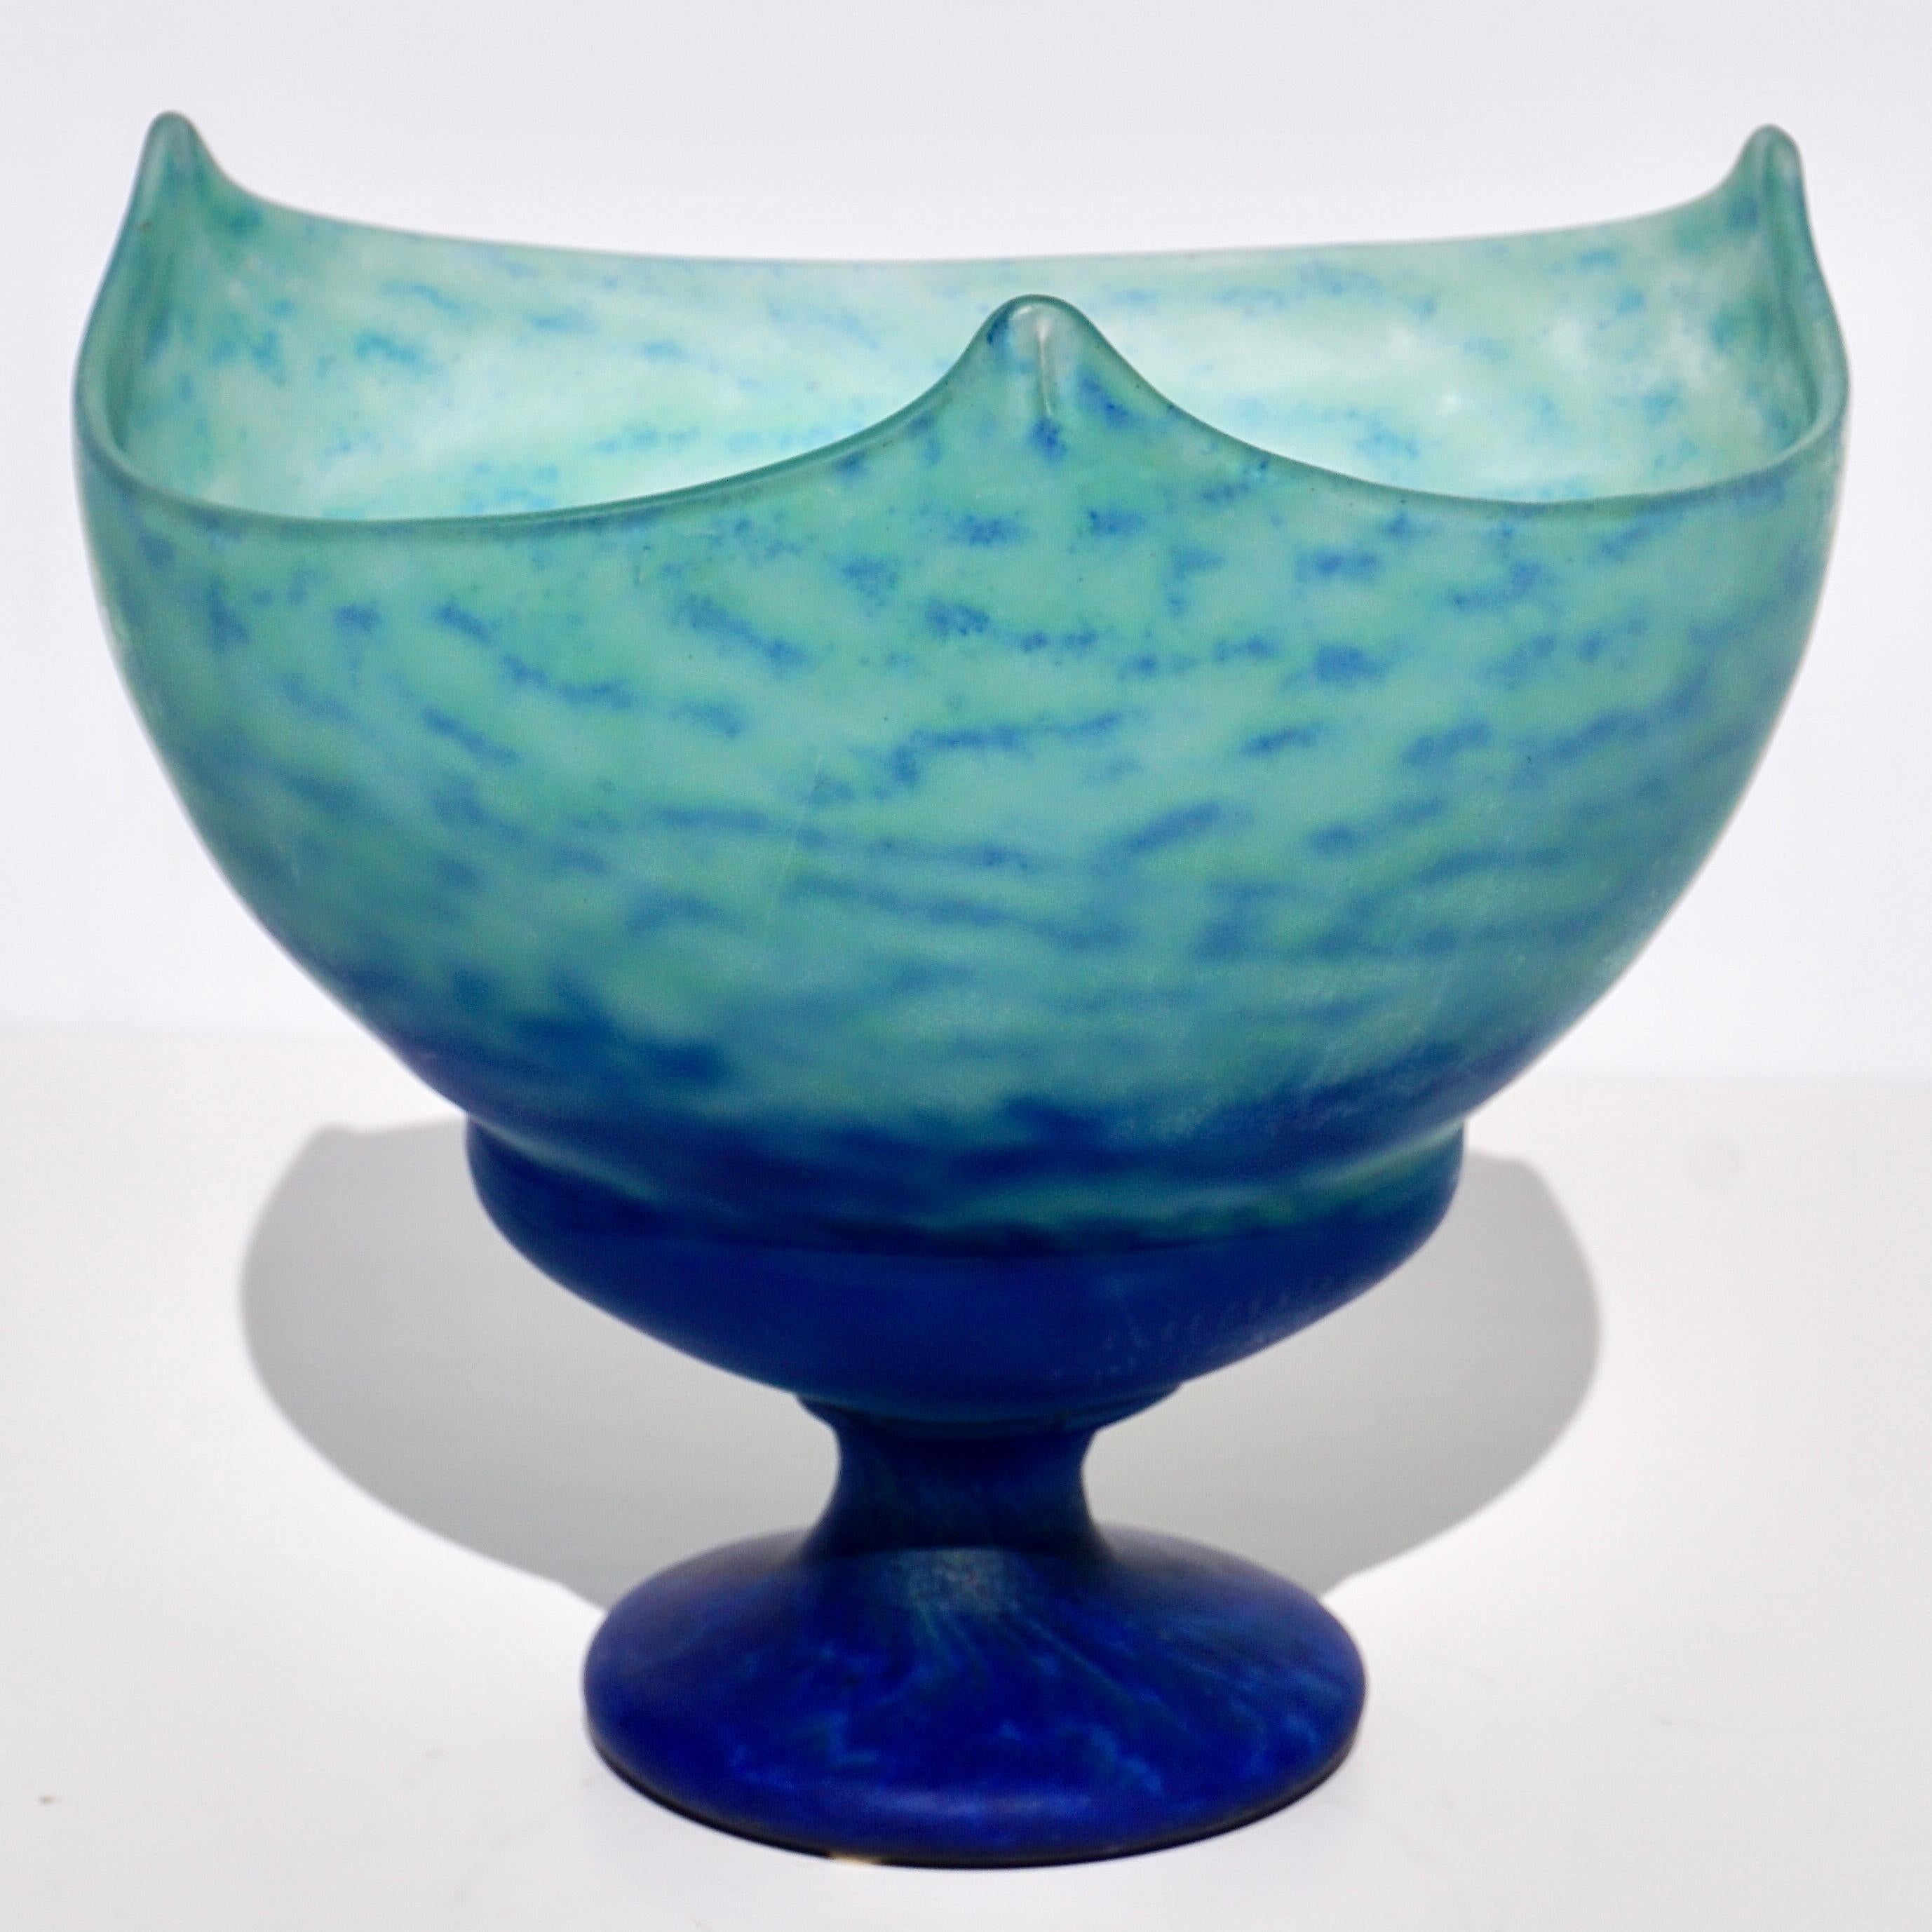 Daum Nancy Blue Variegated Coupe vase.

Everyone who glances towards this beautiful vase feels compelled to acknowledge it with accolades. A fabulous art nouveau art glass vase.
 
France circa 1910 - Glass Art nouveau fruit bowl in glass paste